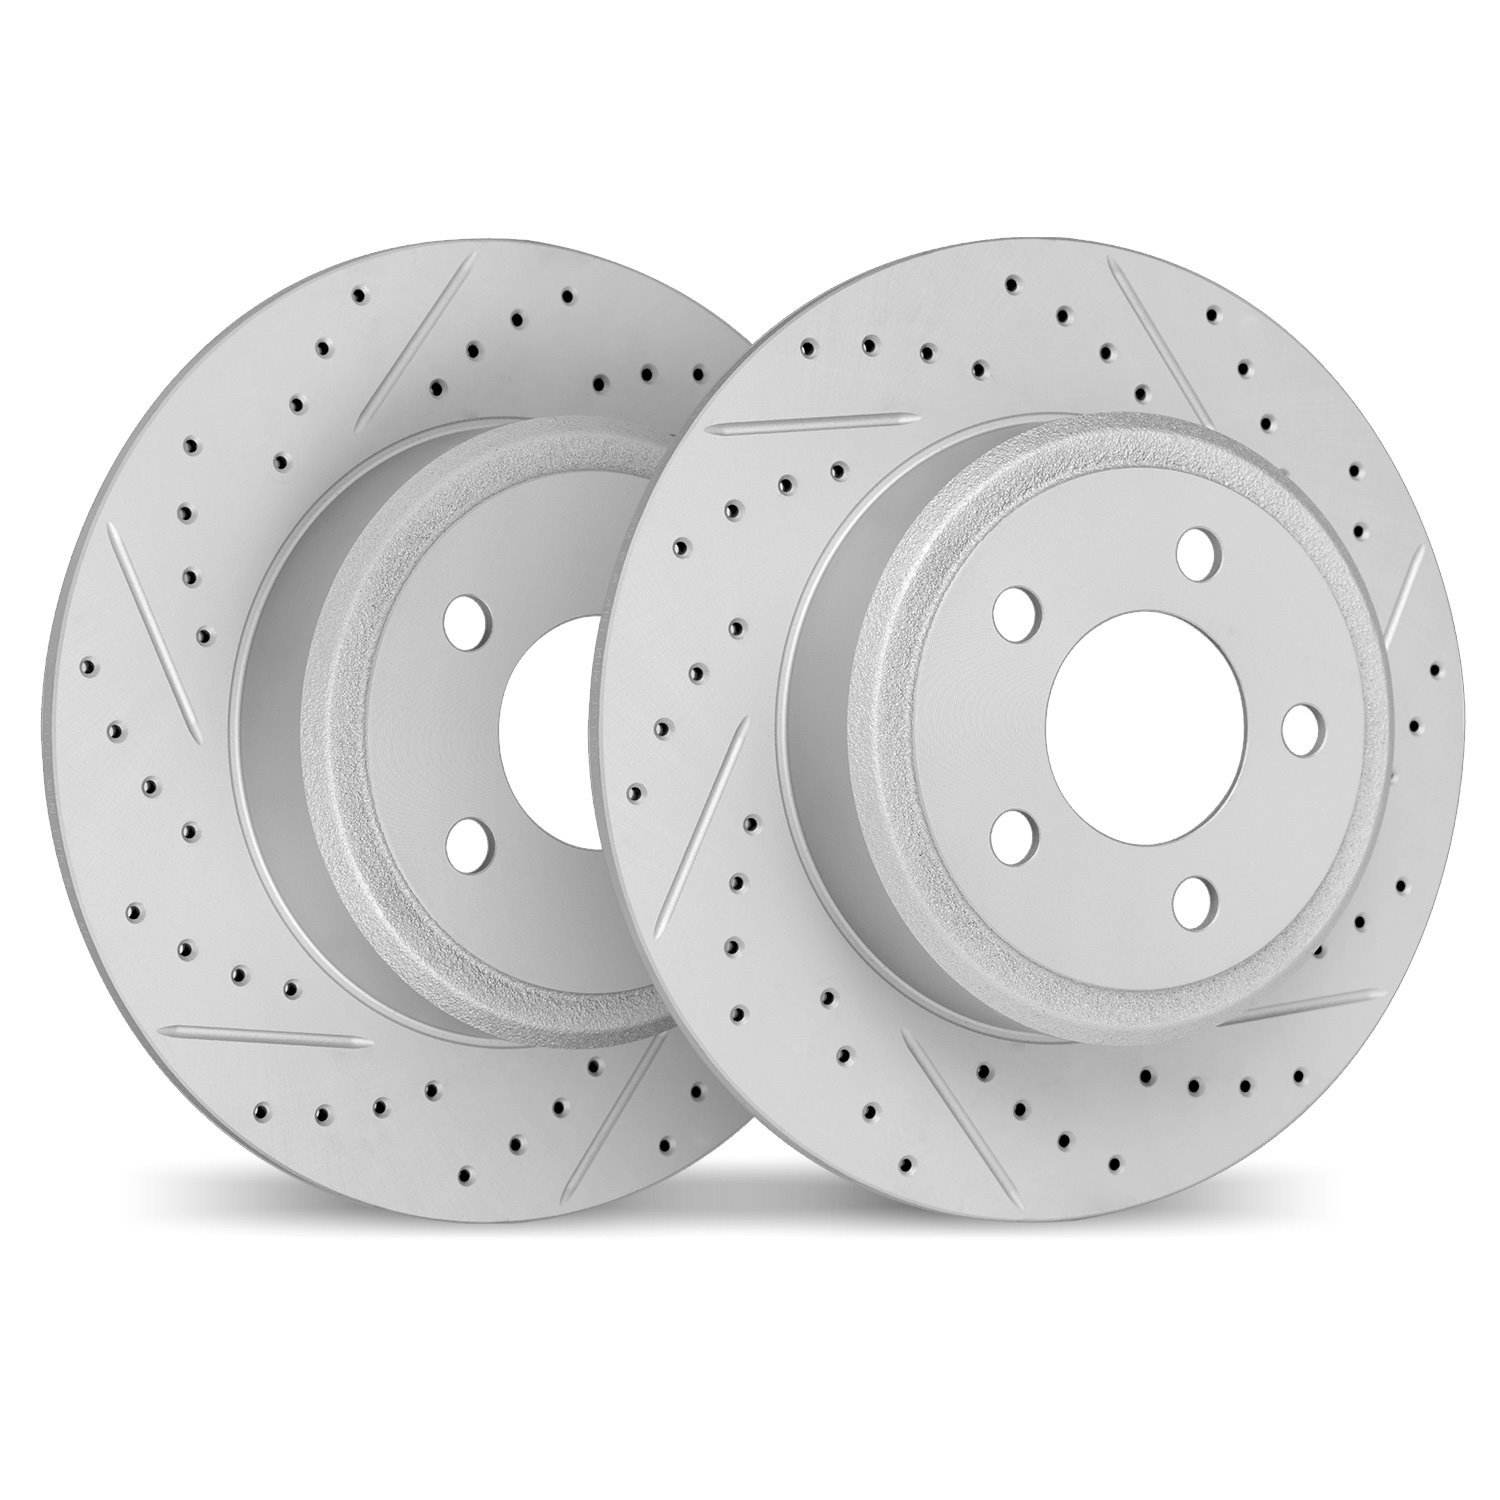 2002-76040 Geoperformance Drilled/Slotted Brake Rotors, 1992-2003 Lexus/Toyota/Scion, Position: Rear